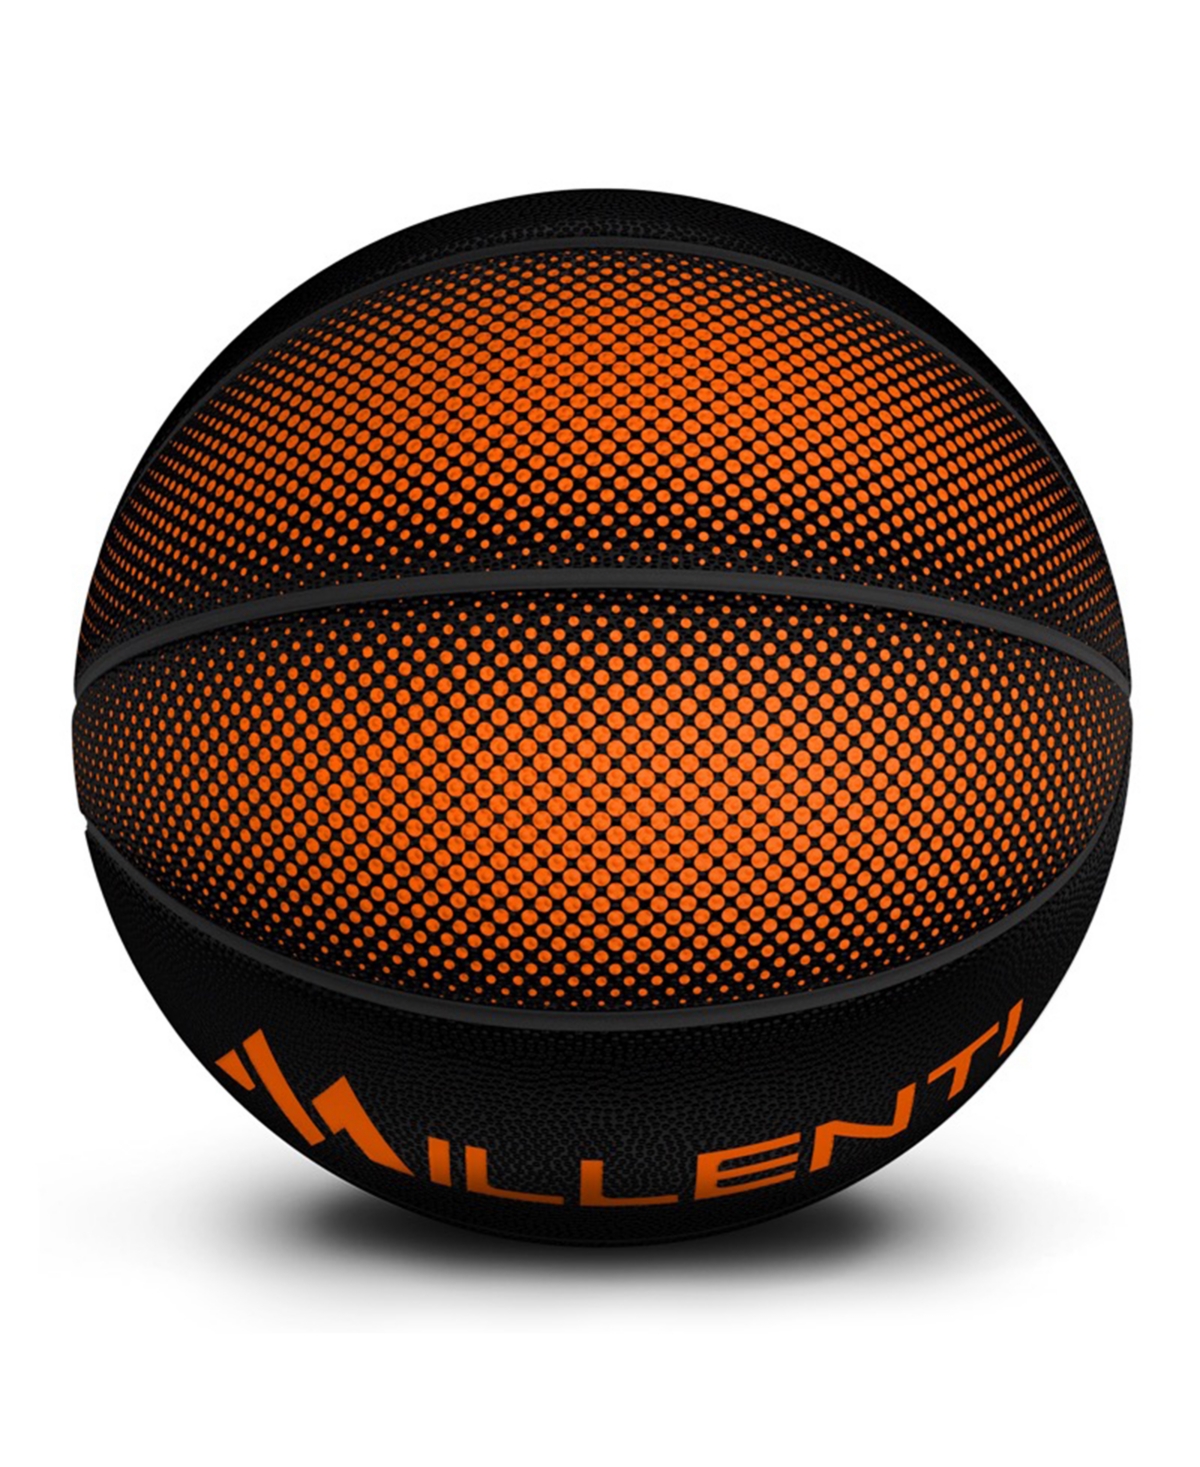 Millenti Basketball Official Size 7 Outdoor Indoor Ball Street Smart Camo With Easy To Track Design Adult Siz In Orange